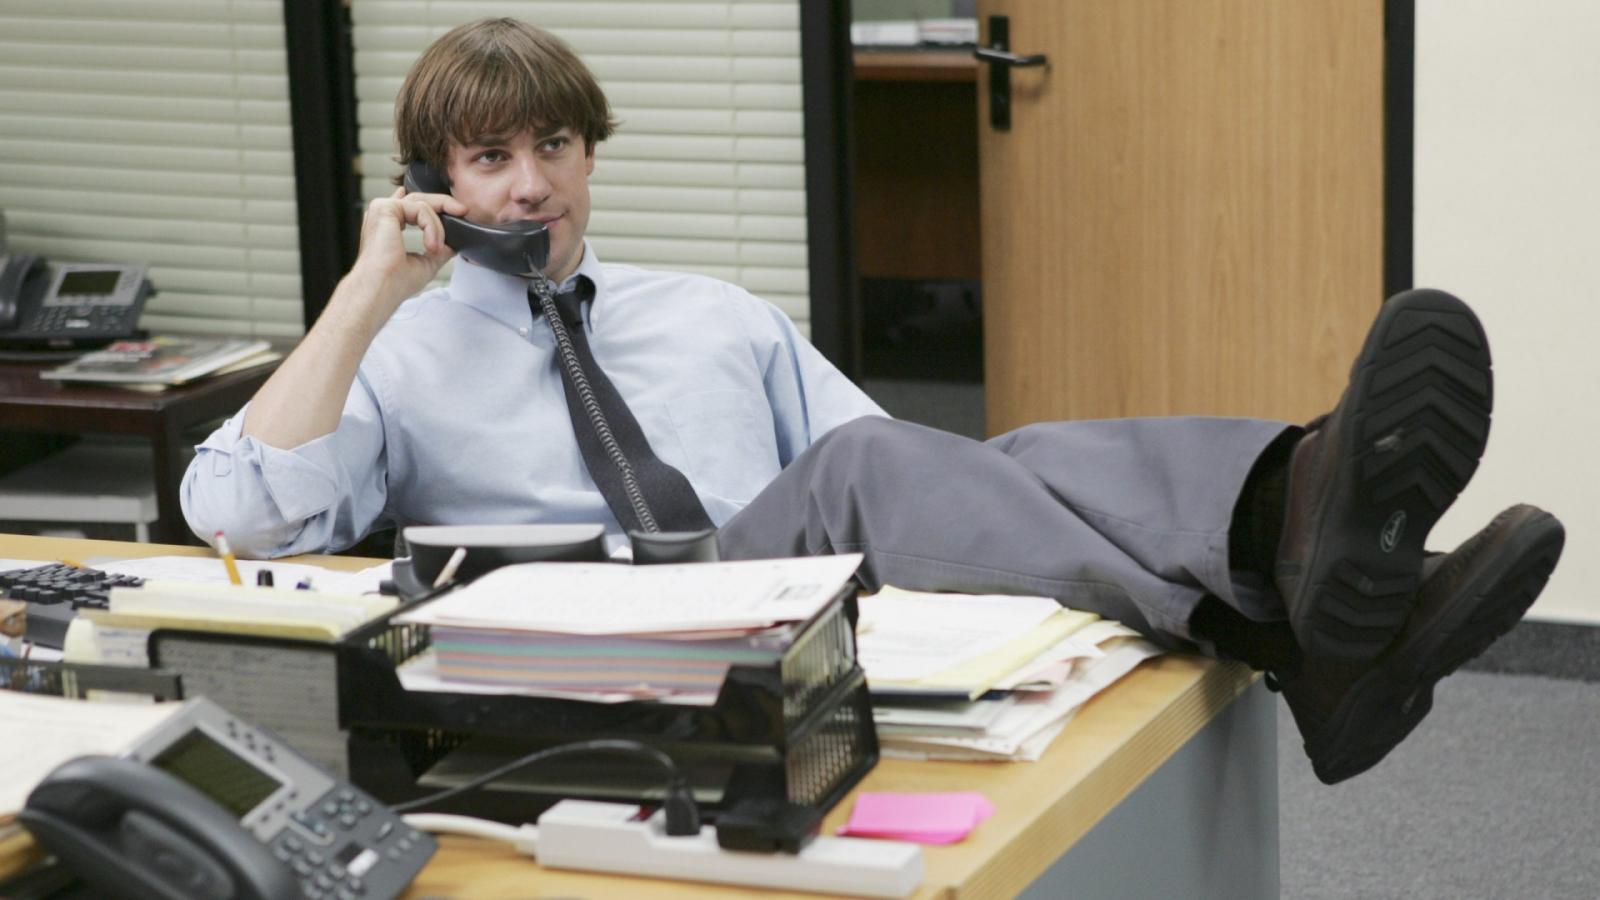 Which The Office Character Are You, Based on Your Enneagram Type? - image 9